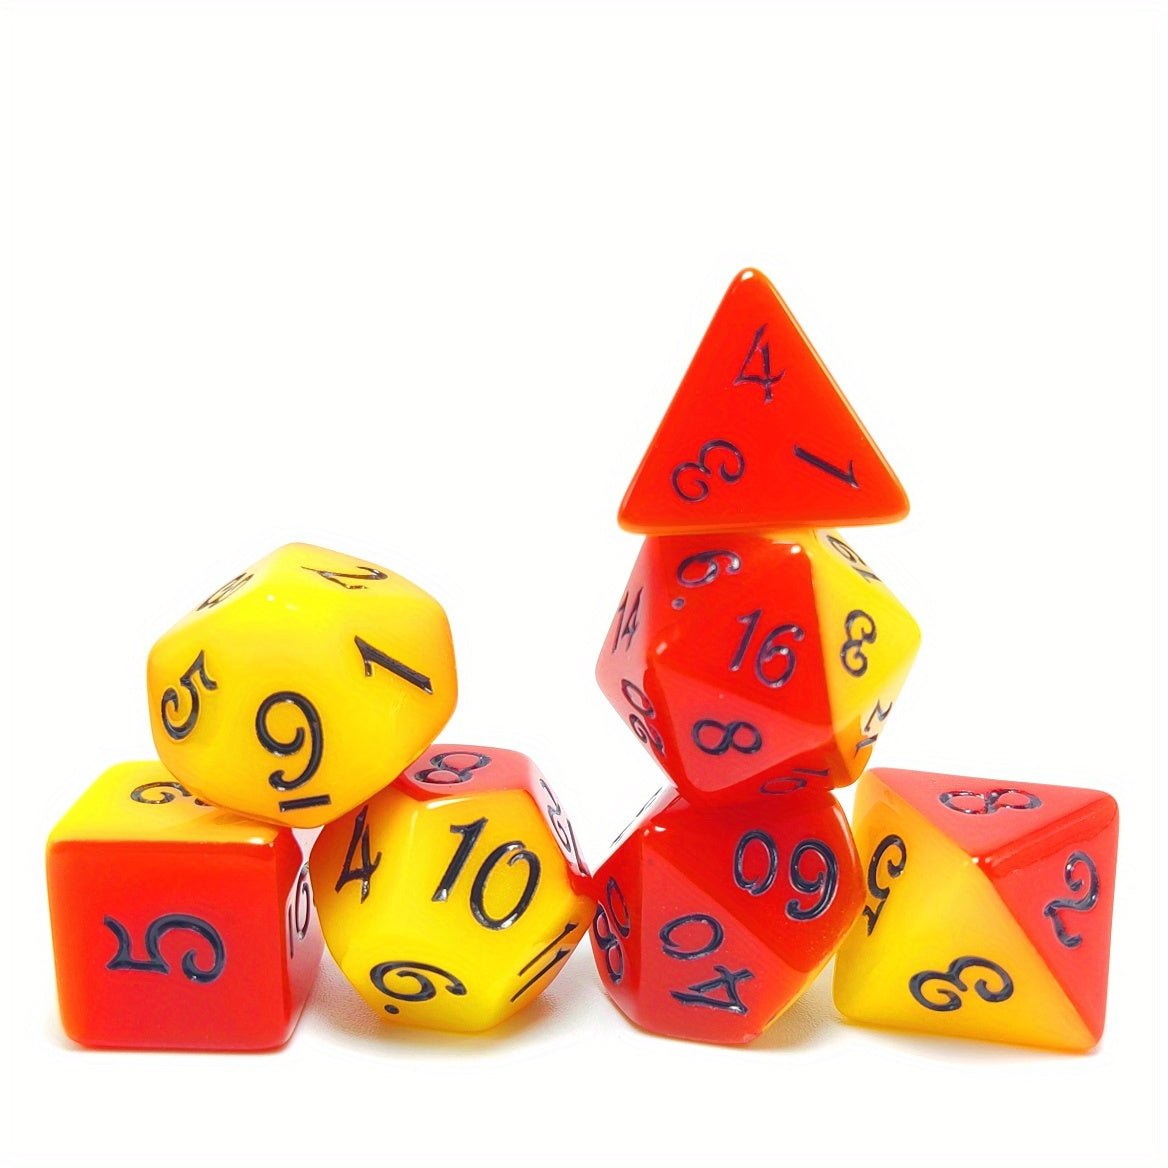 FREE Today: Red And Orange Layered Design Board Game Dice Set